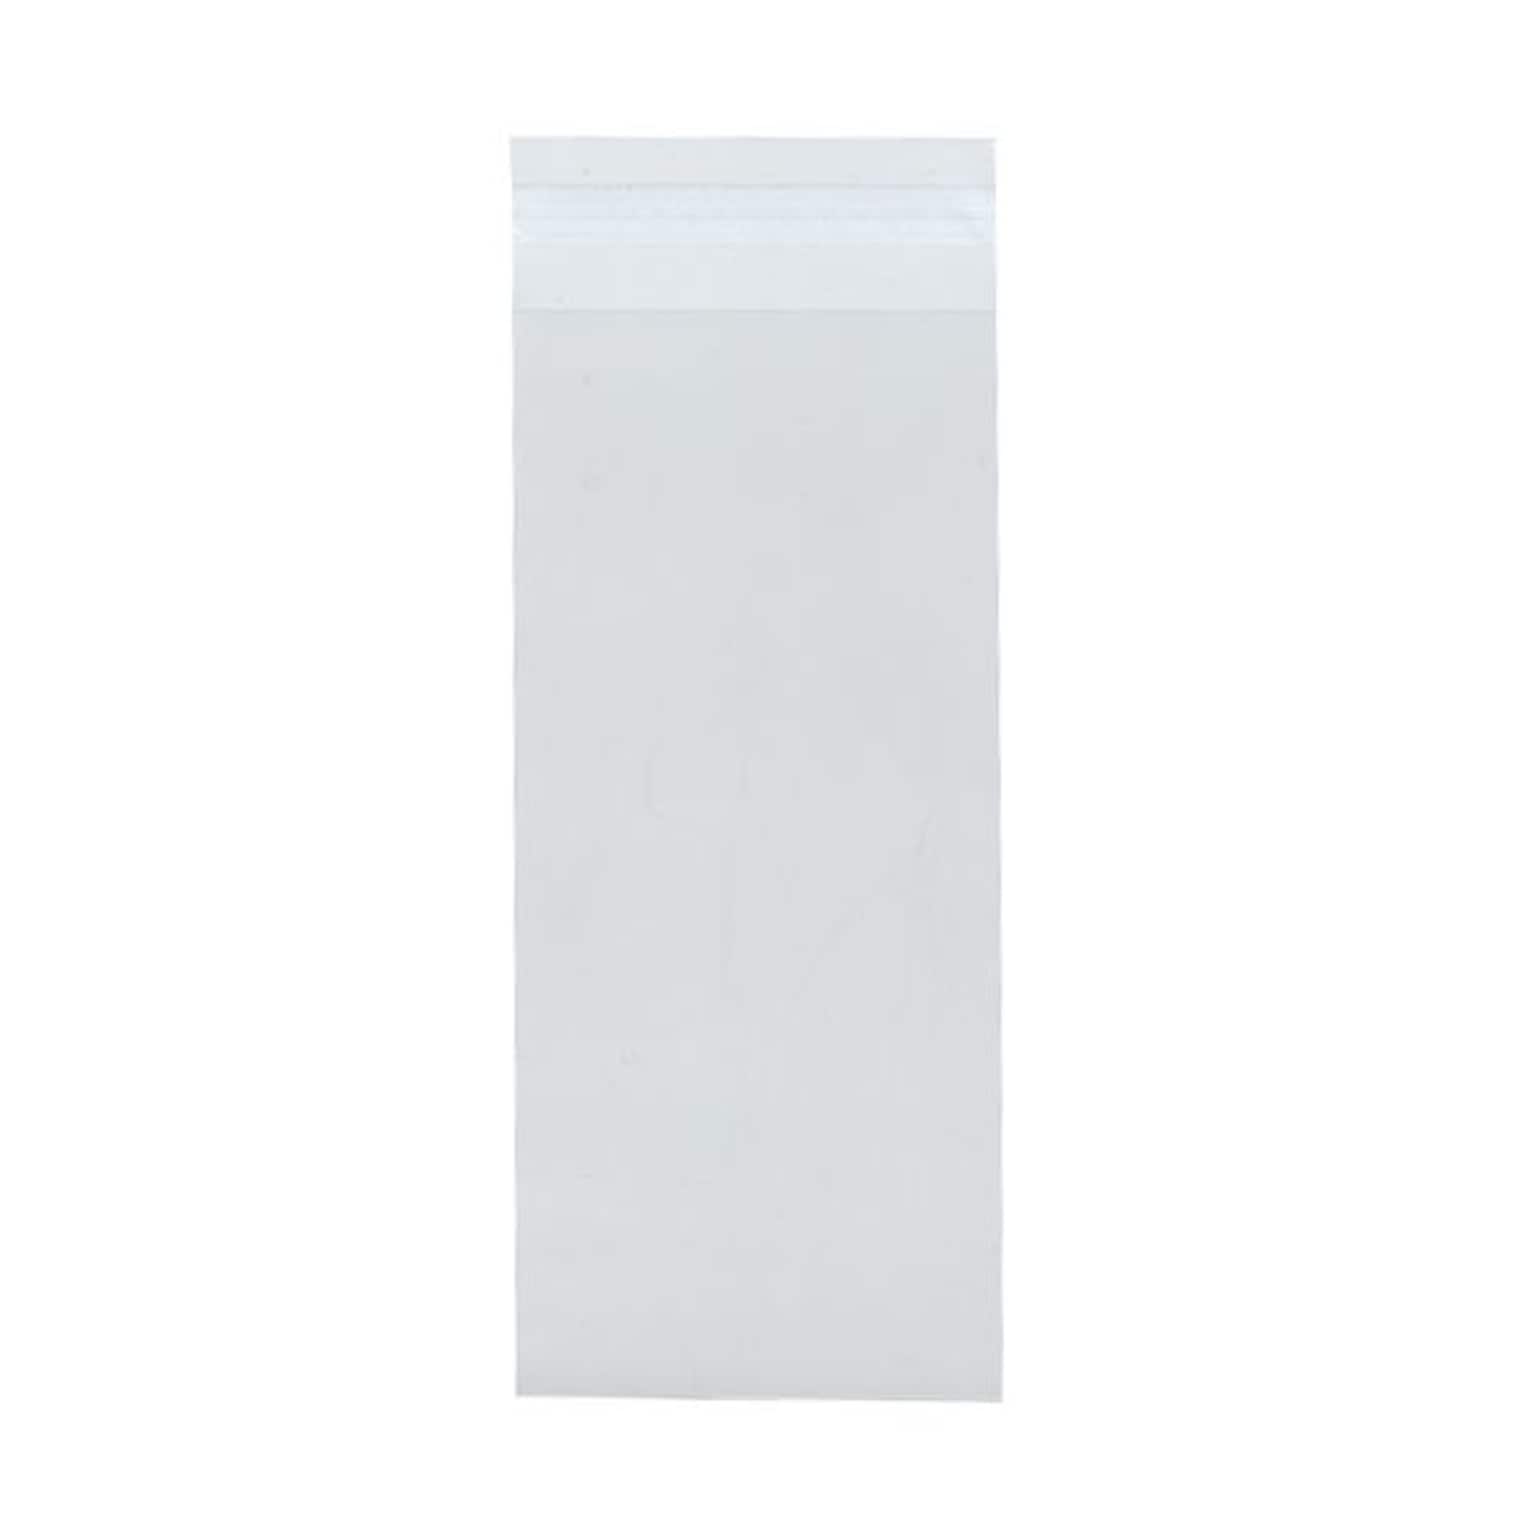 JAM Paper Cellophane Envelope with Peel & Seal Closure, #12 Policy, 4.4375 x 12.25, Clear, 100/Pack (NUM12CELLO)